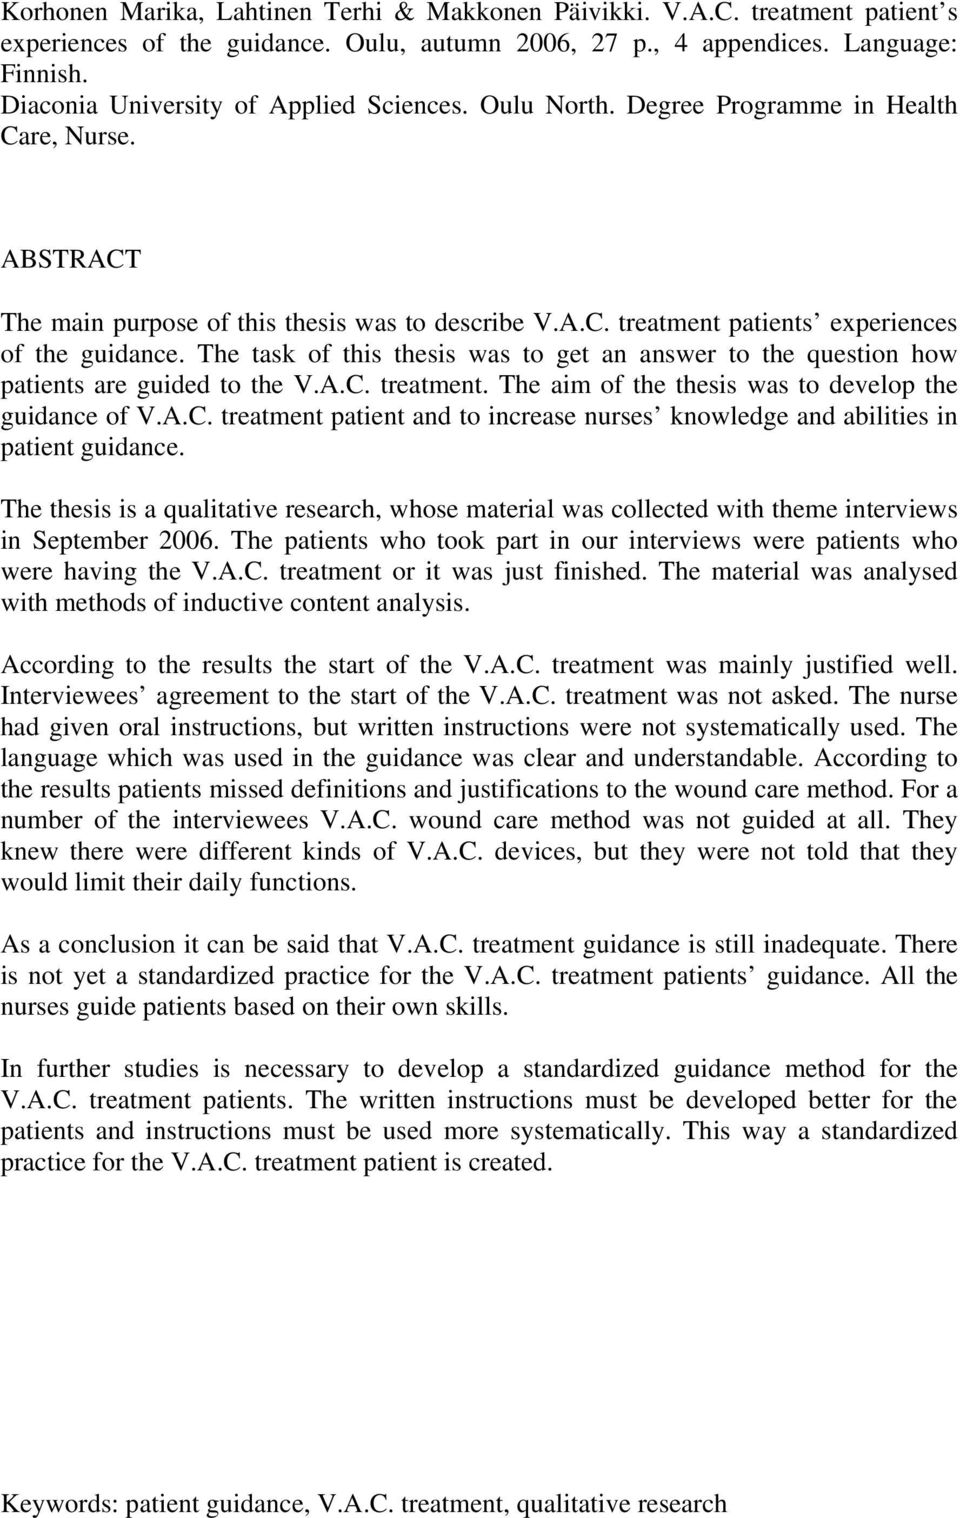 The task of this thesis was to get an answer to the question how patients are guided to the V.A.C. treatment. The aim of the thesis was to develop the guidance of V.A.C. treatment patient and to increase nurses knowledge and abilities in patient guidance.